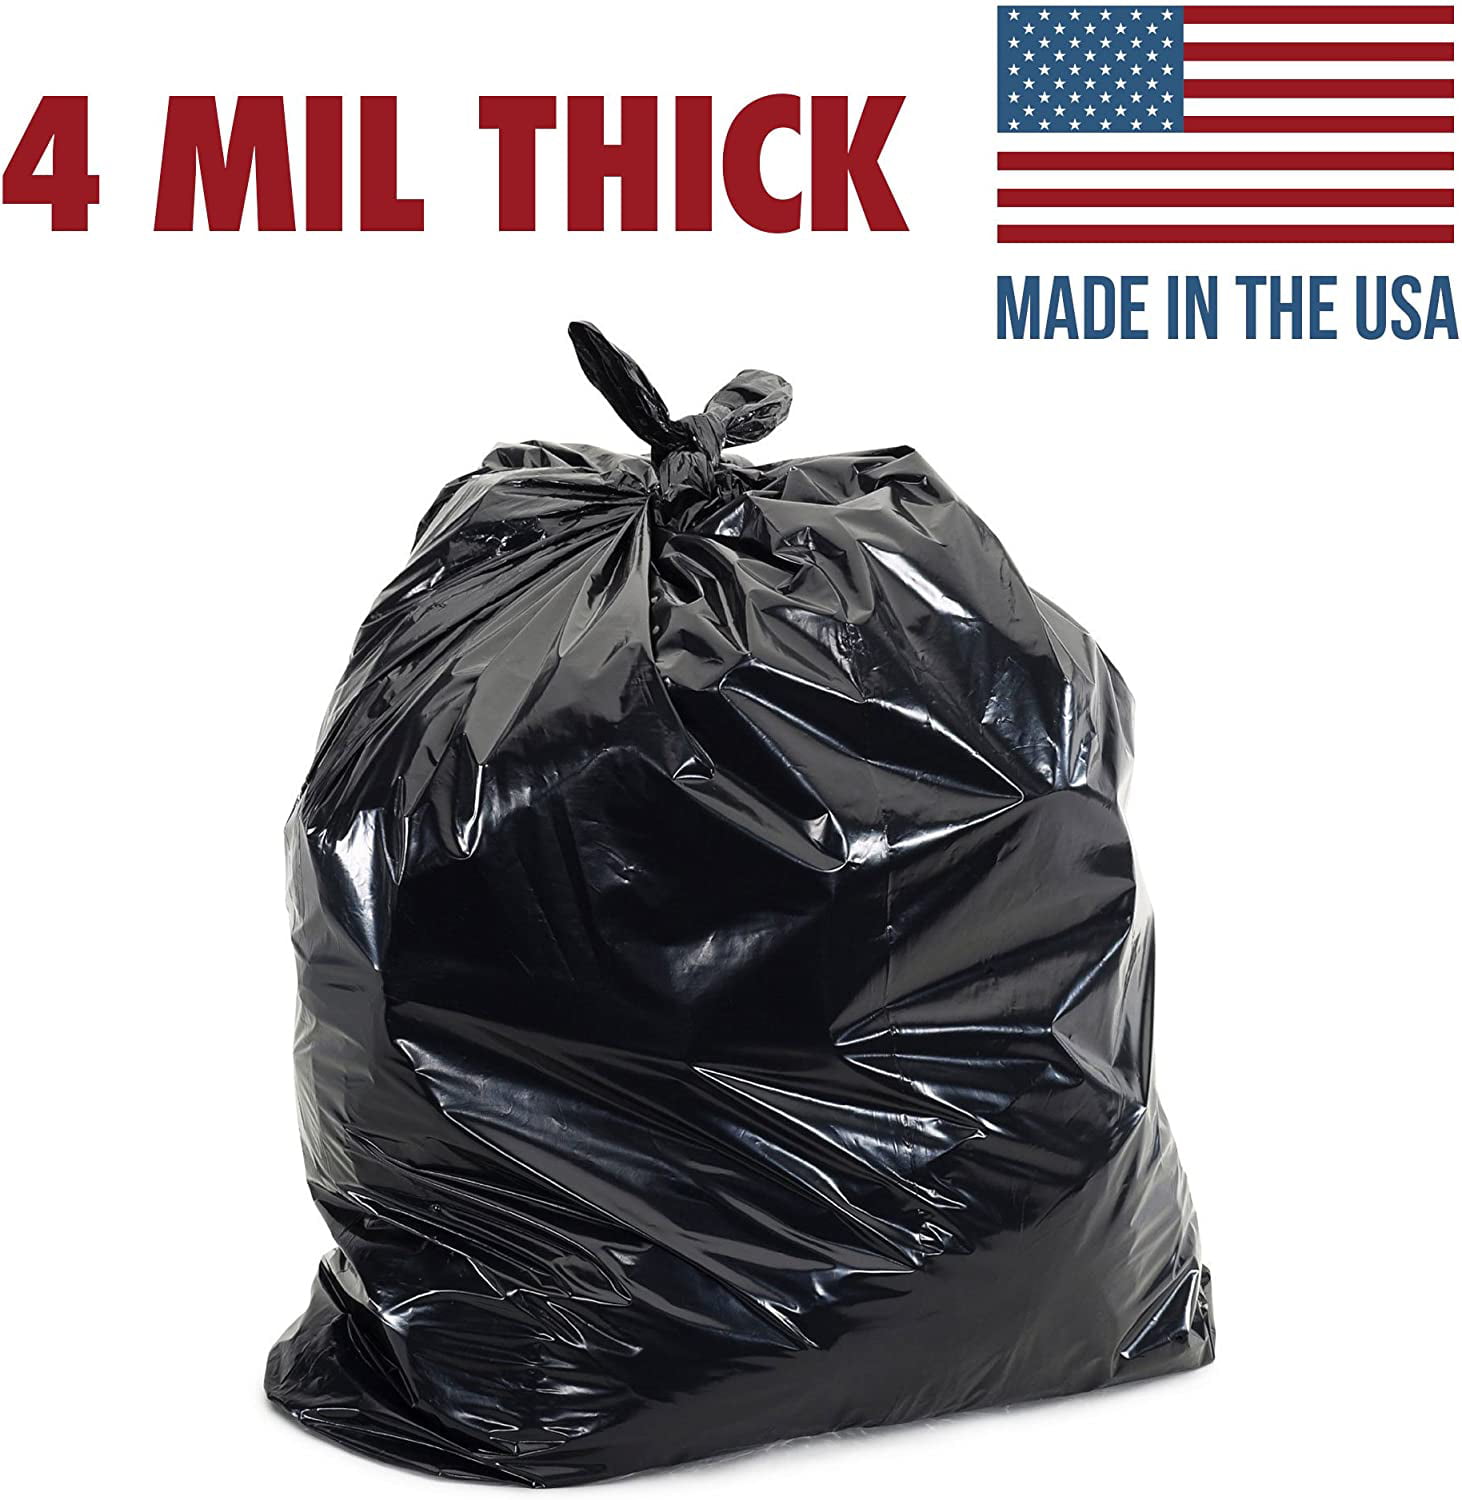 50 Gallon Garbage Bags - Just For You